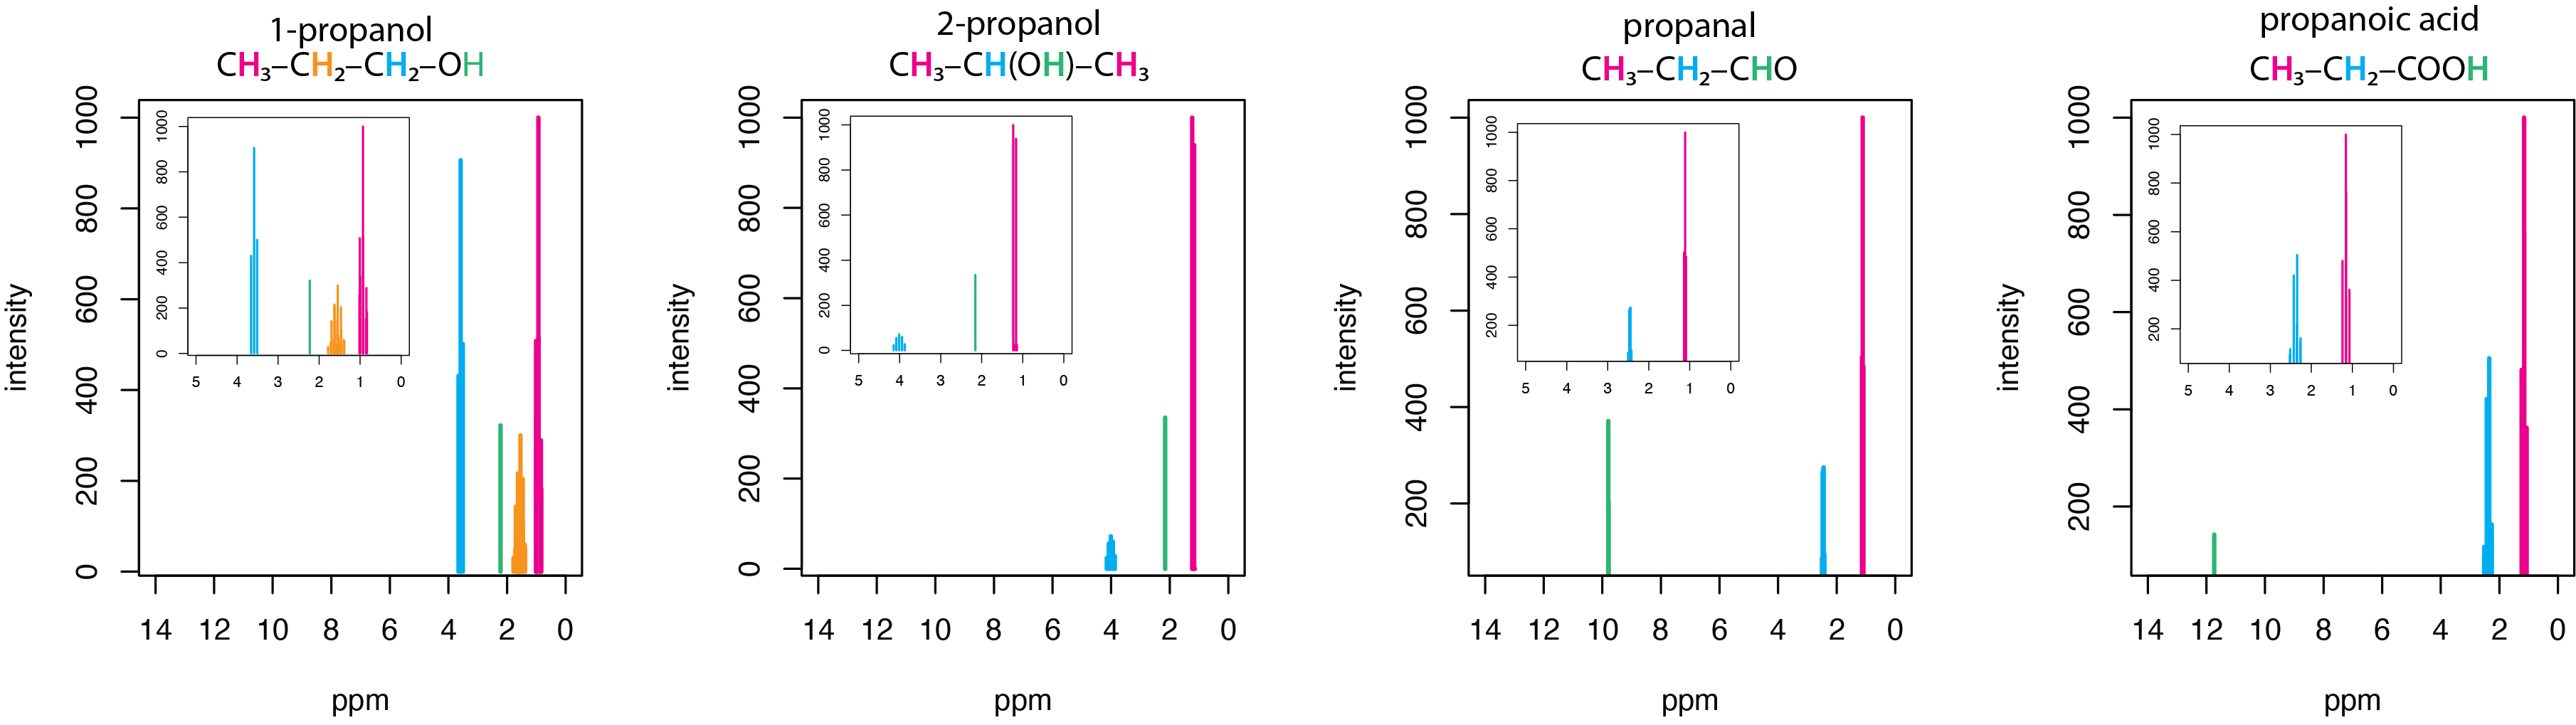 A set of charts showing 1H NMR spectra for 1-propanol, 2-propanol, propanal, and propanoic acid